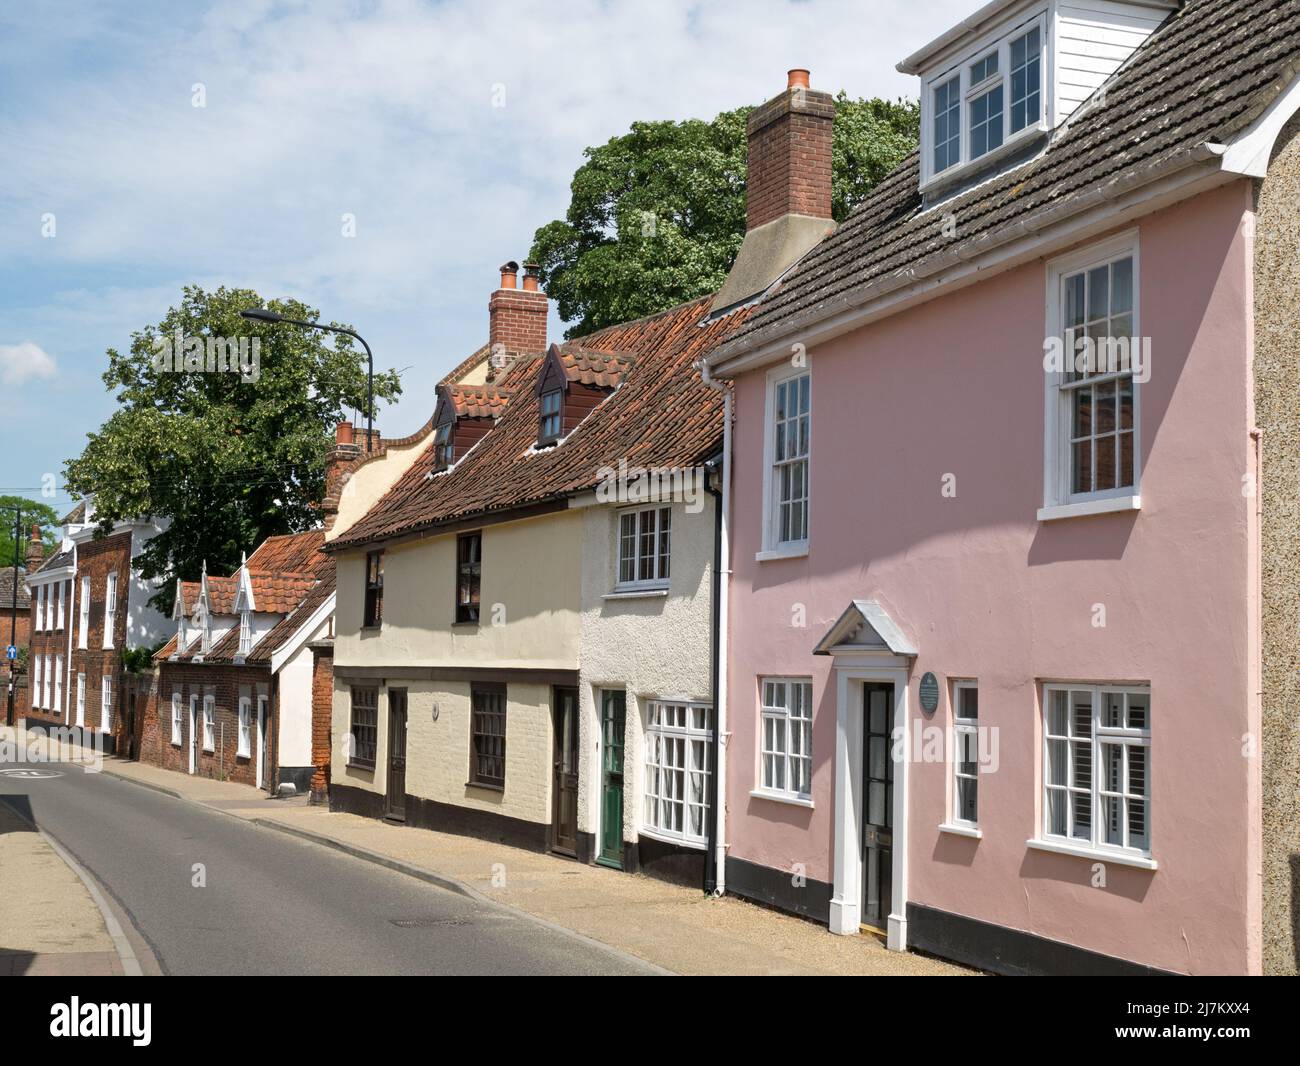 Mixture of Attractive Residential Properties & Architectural Styles in the Market Town of  Beccles, Suffolk, England, UK, Stock Photo